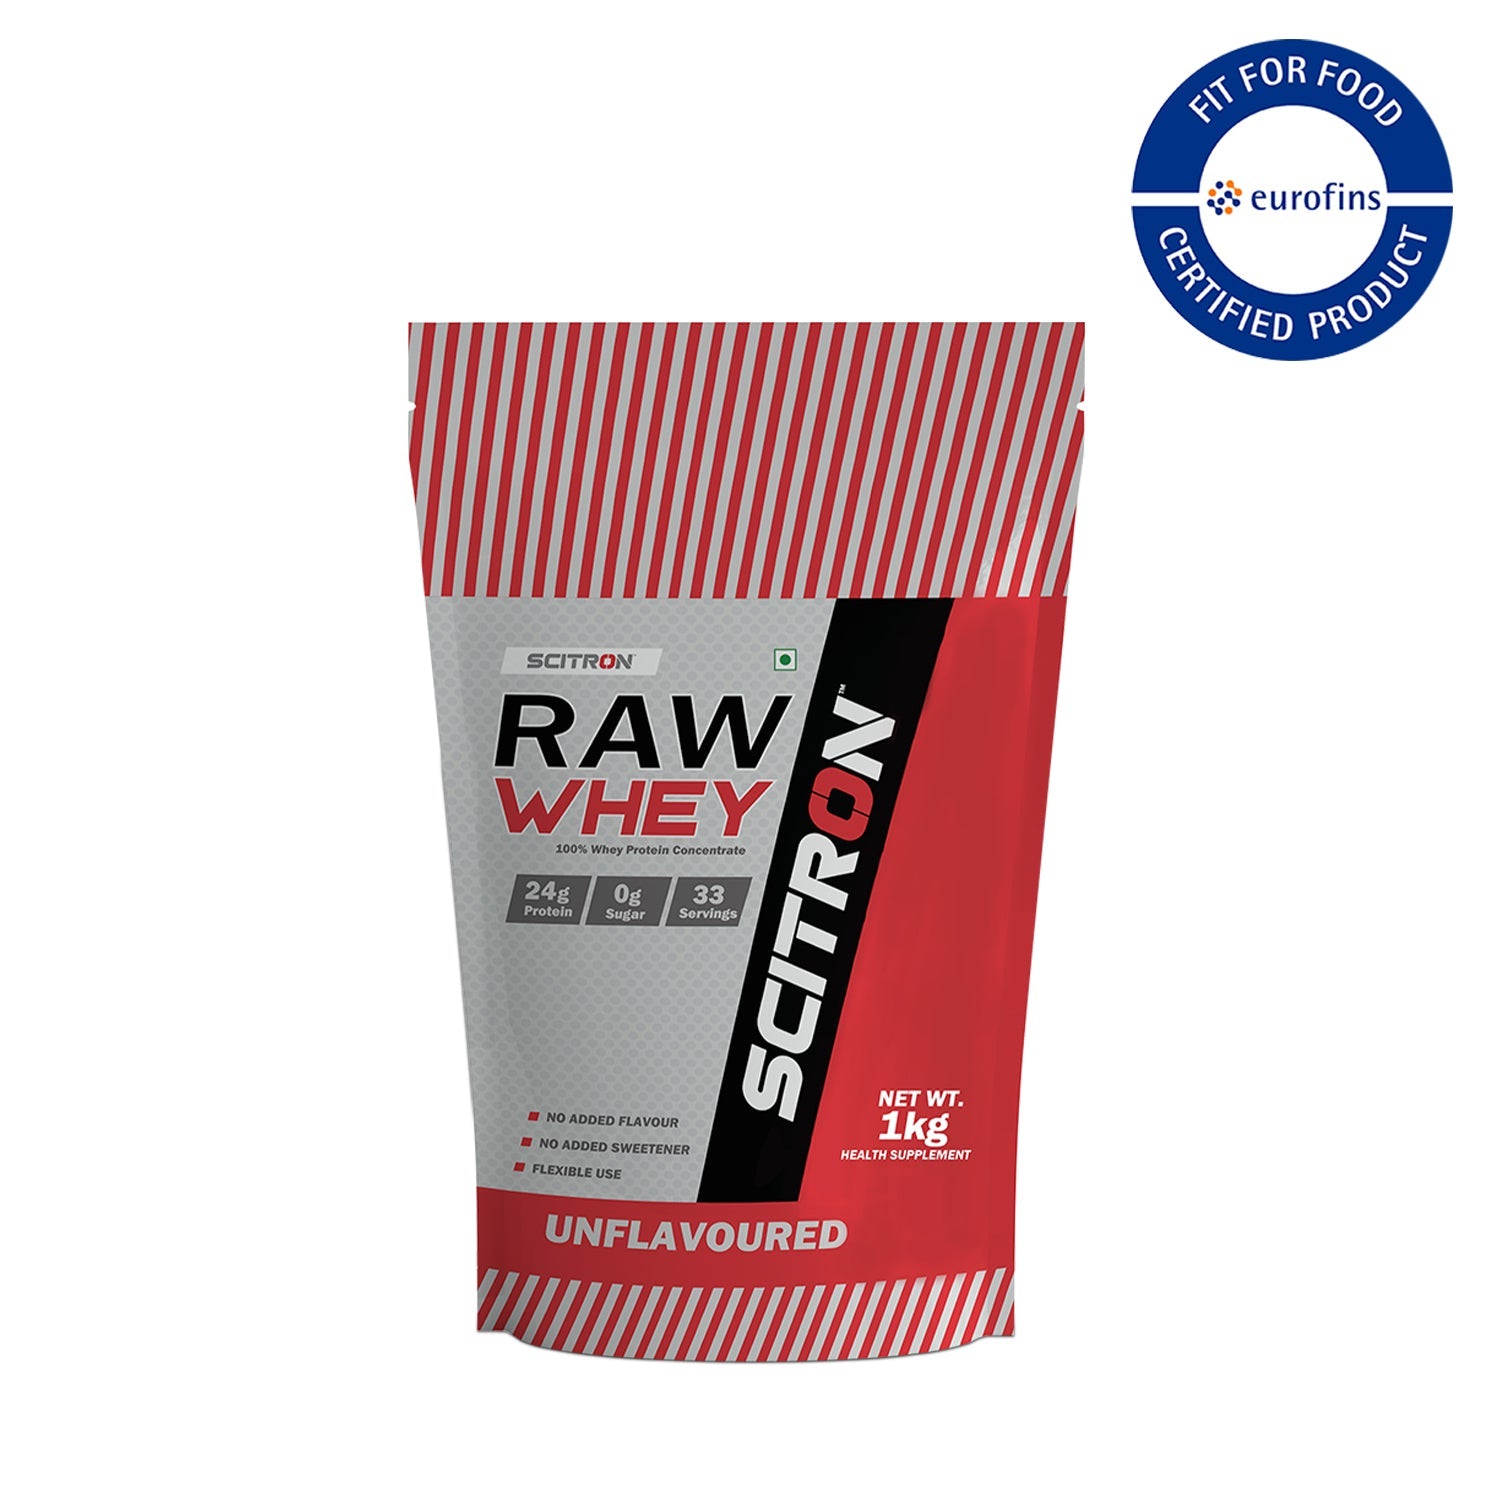 100% RAW Whey Protein Concentrate